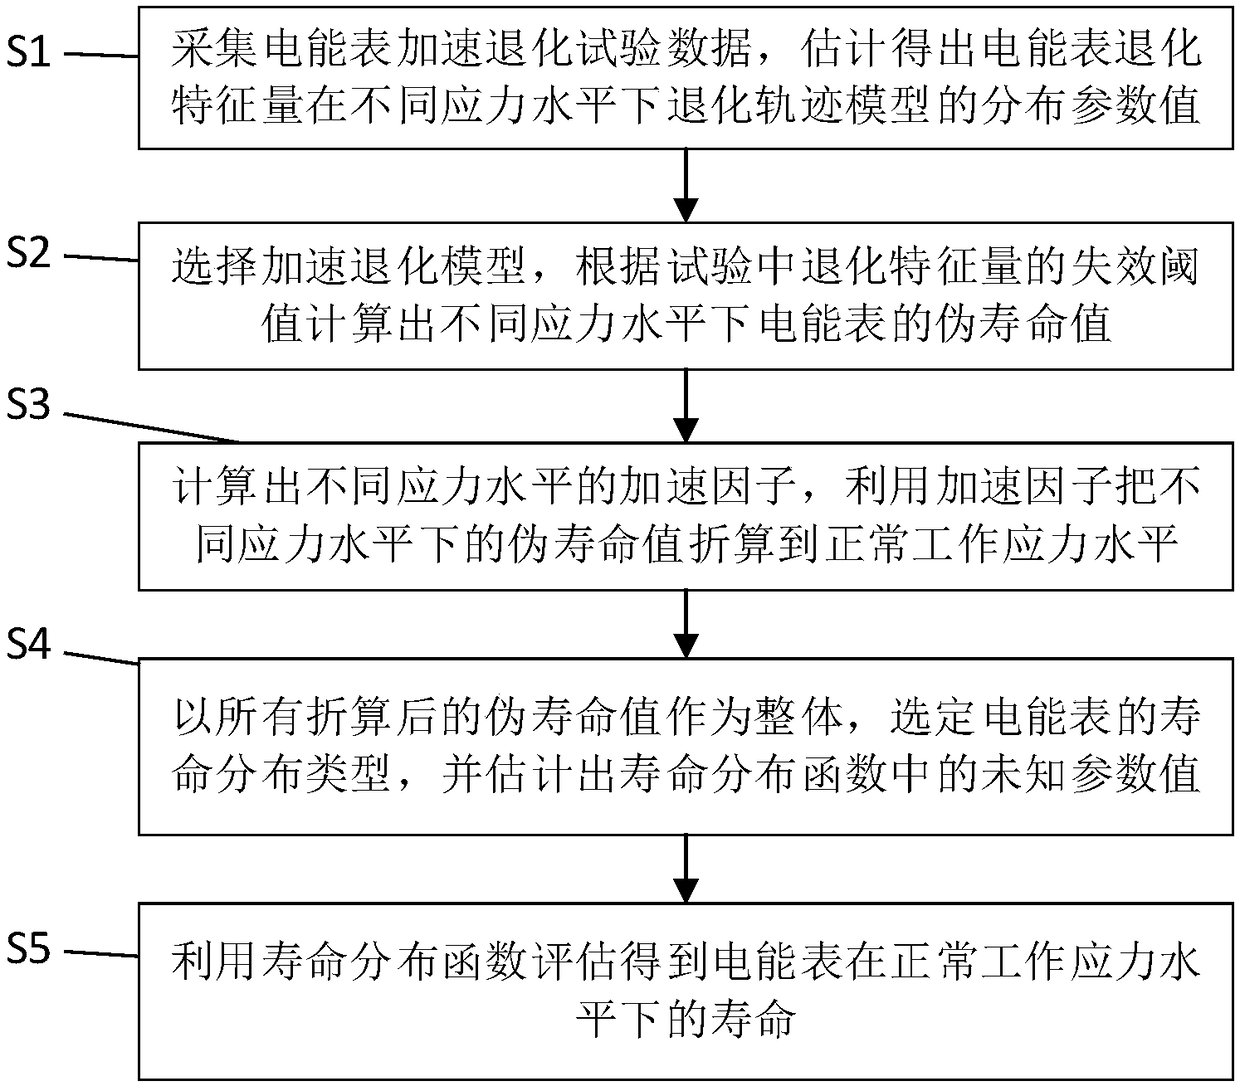 Electric energy meter life evaluation method based on accelerated degradation test